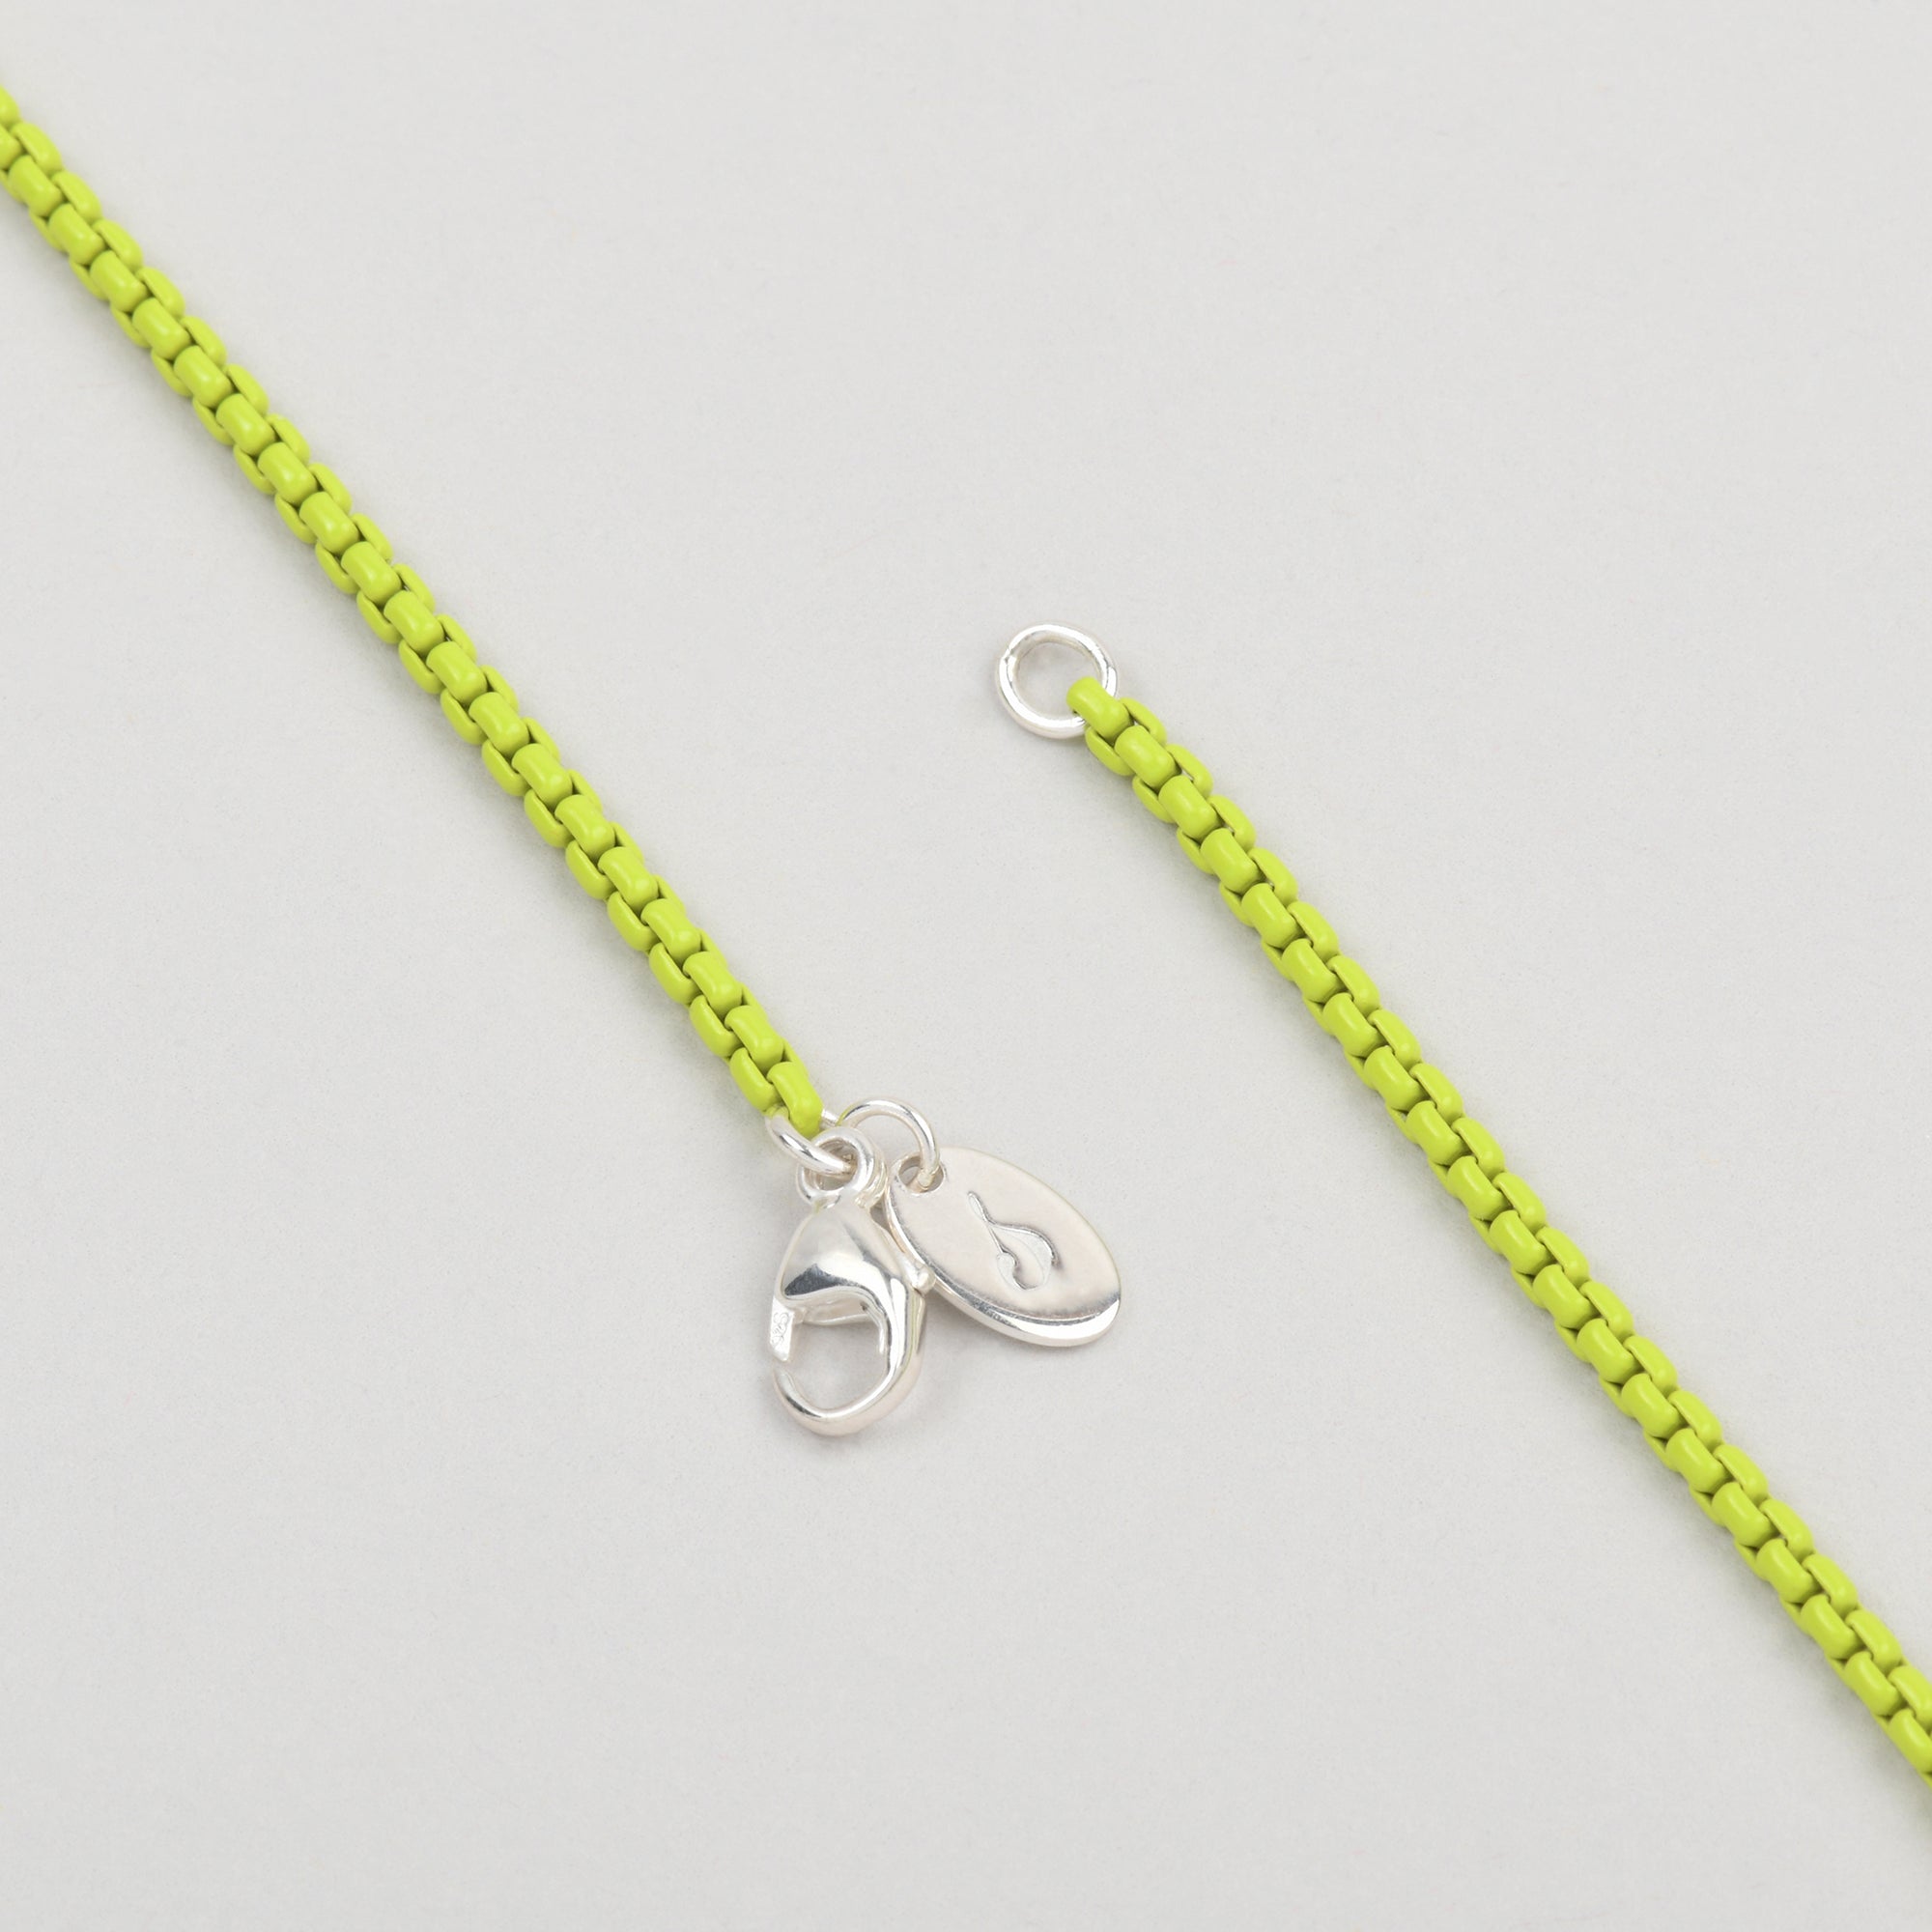 trendy pantone color coated chain made from sterling silver with a branded lobster clasp